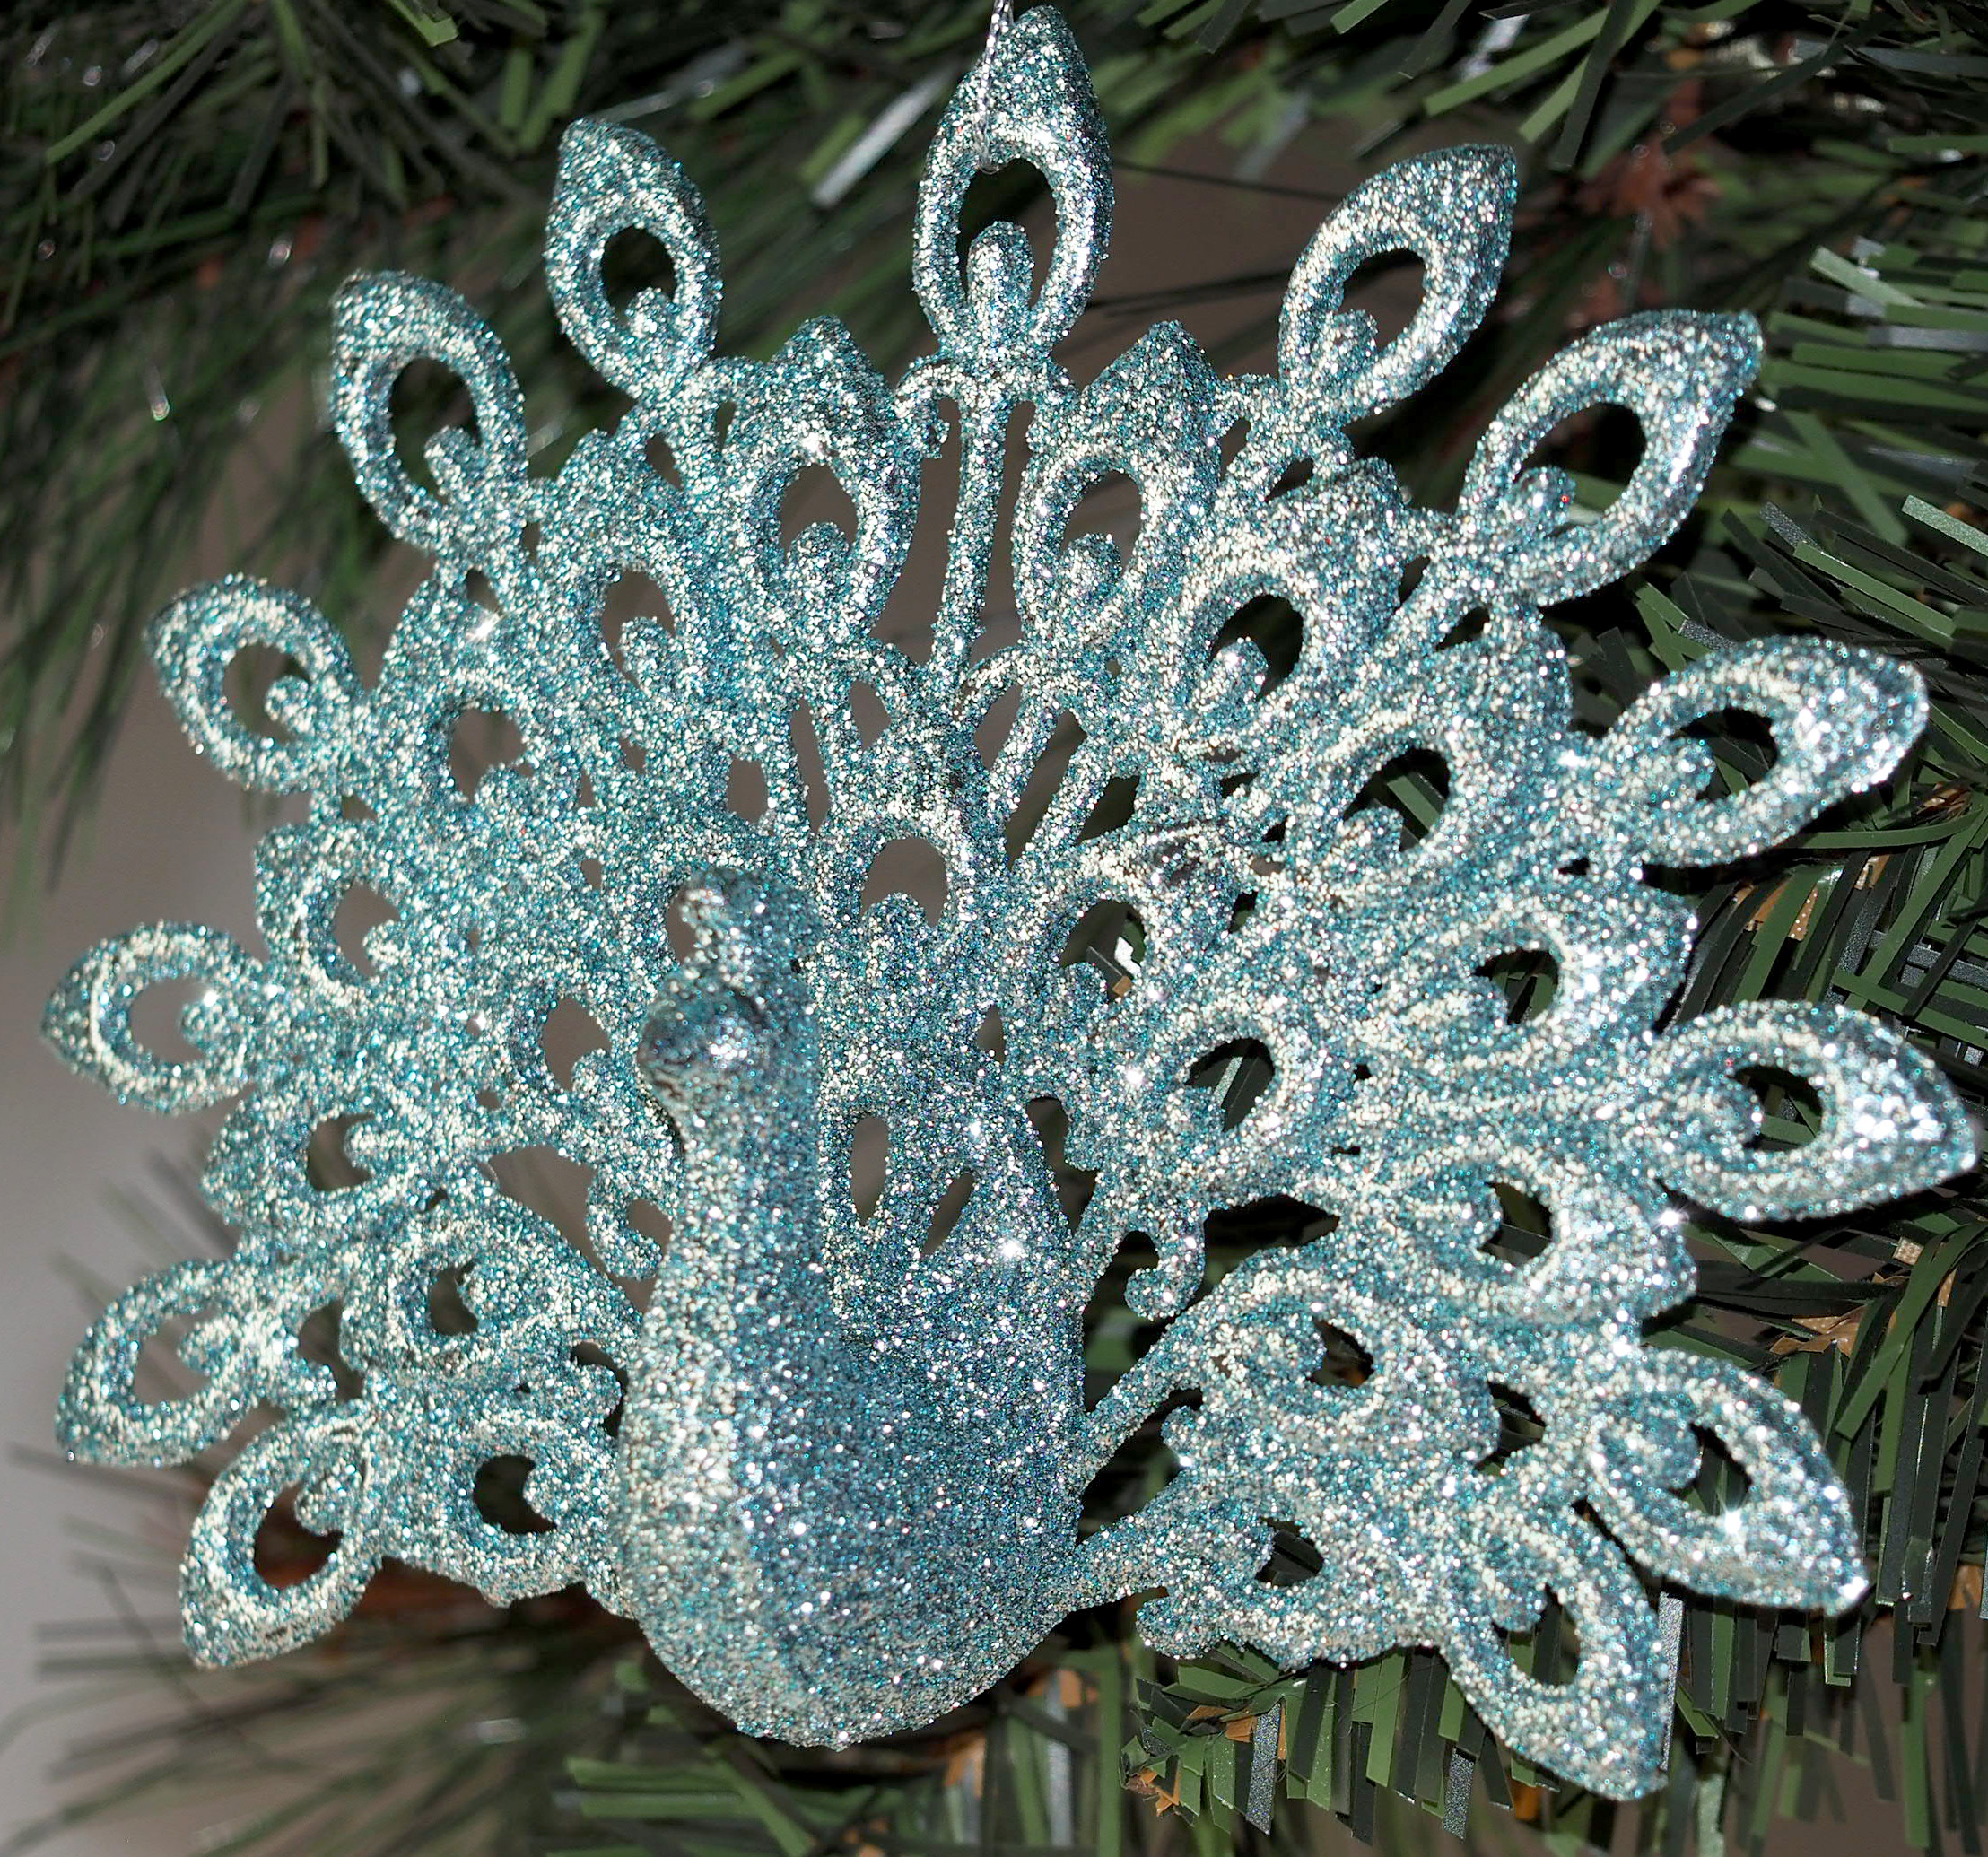 Large Glitter Peacock Christmas Tree Baubles Decorations - Ice Blue (Set of 4)